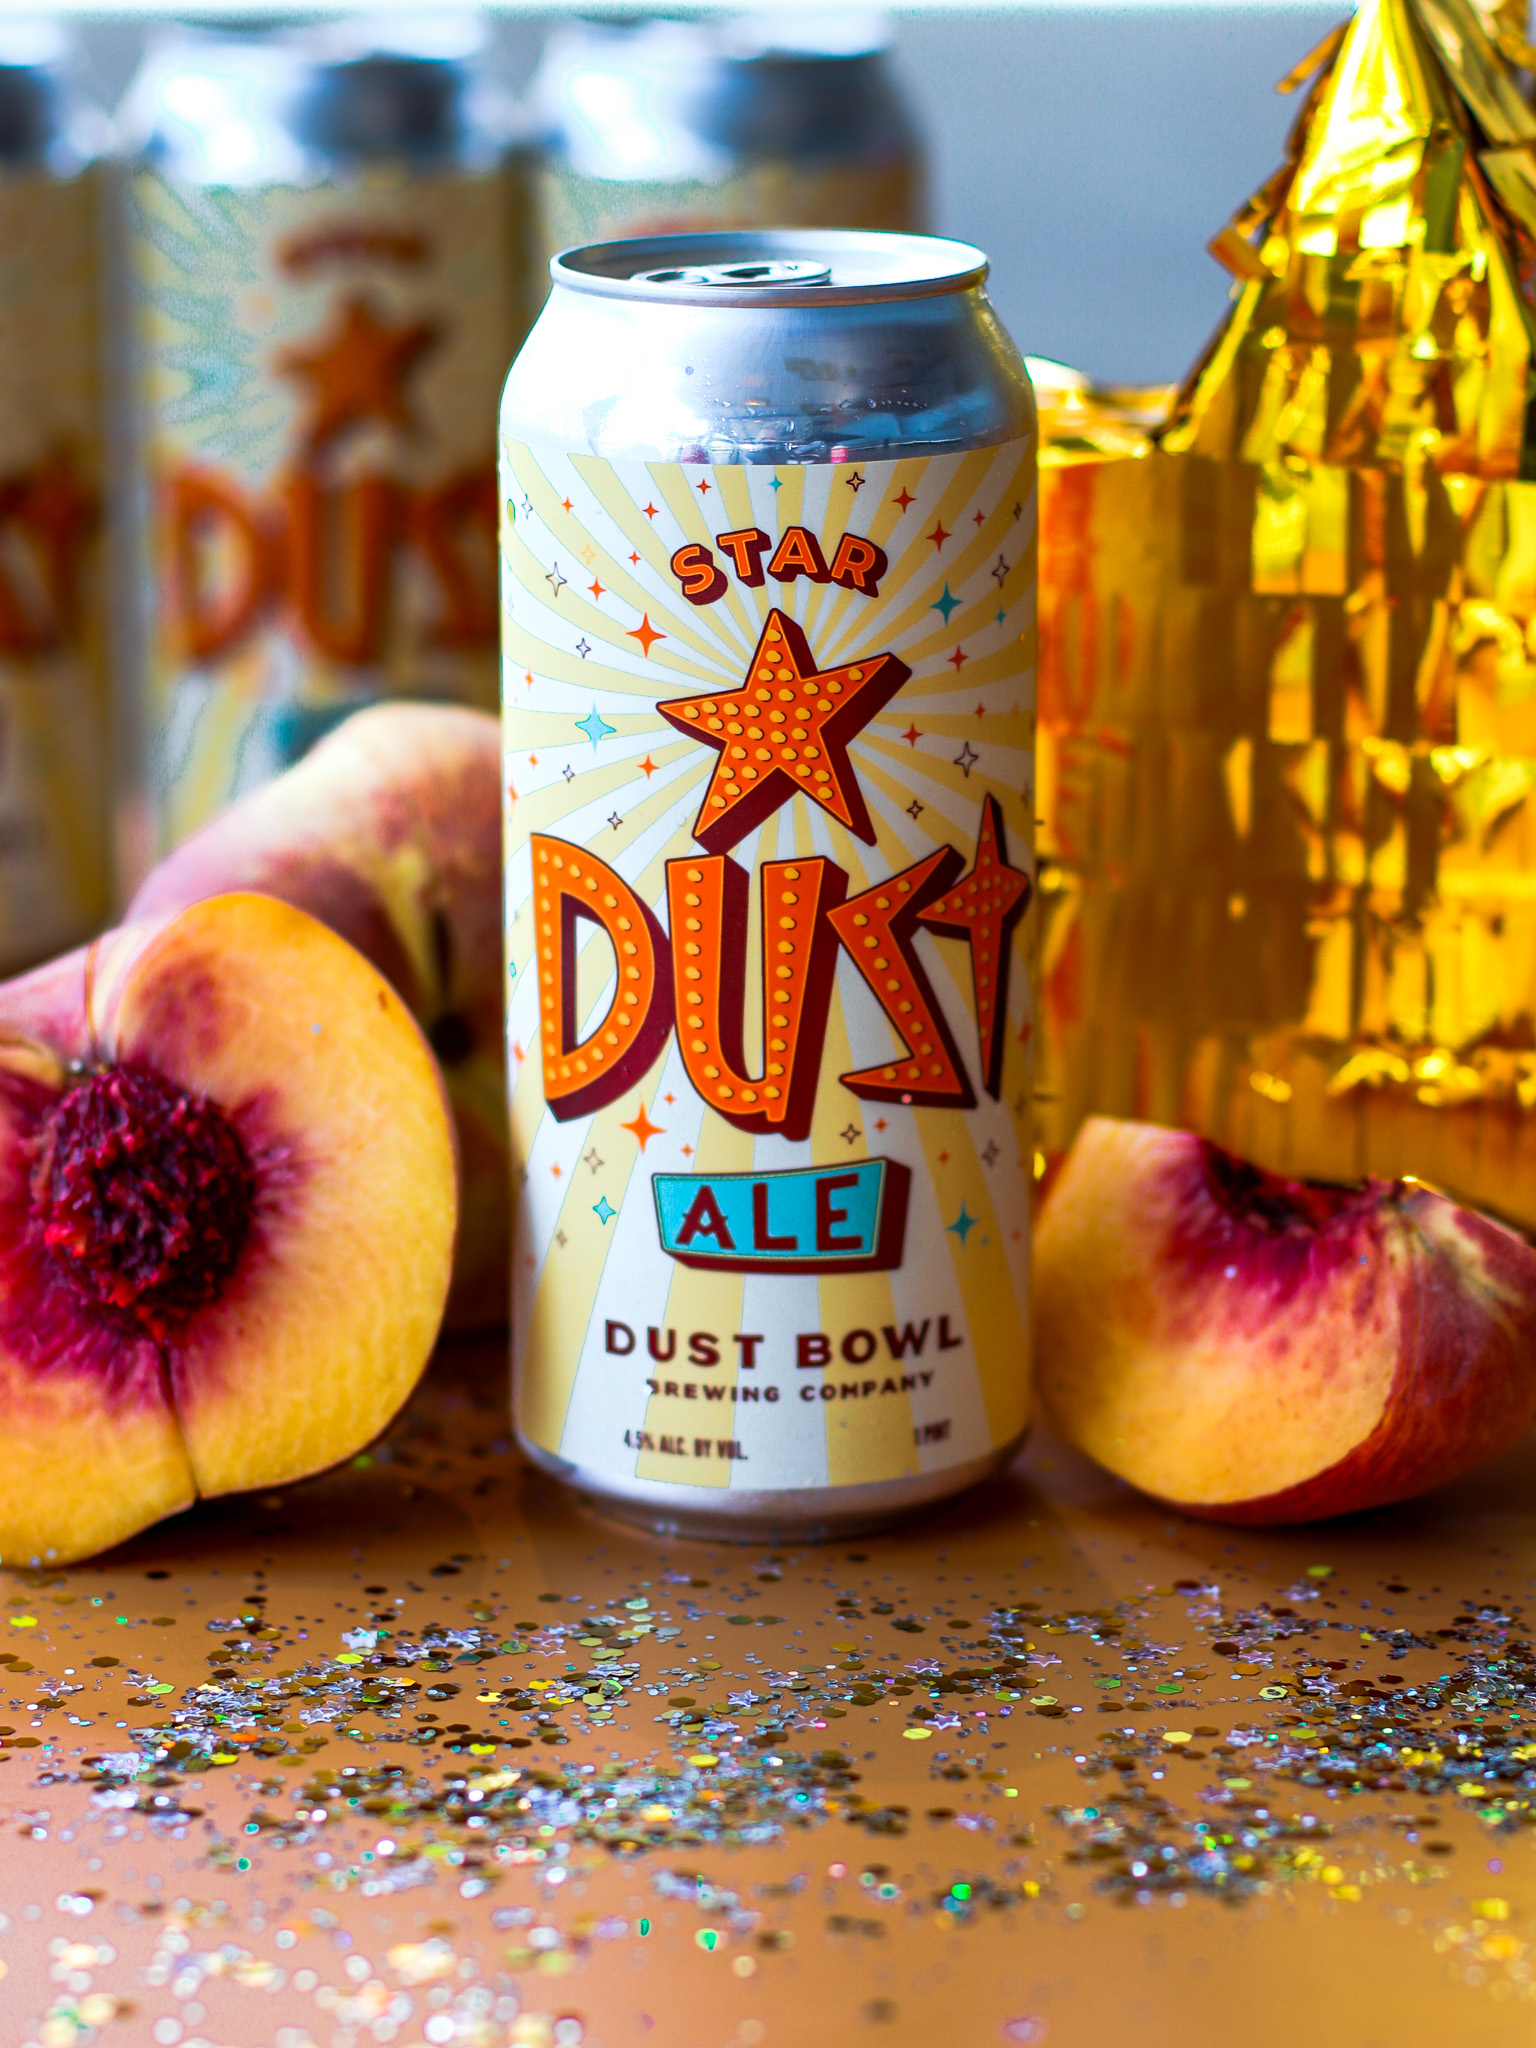 Picture of Star Dust Ale can with fresh peaches and confetti